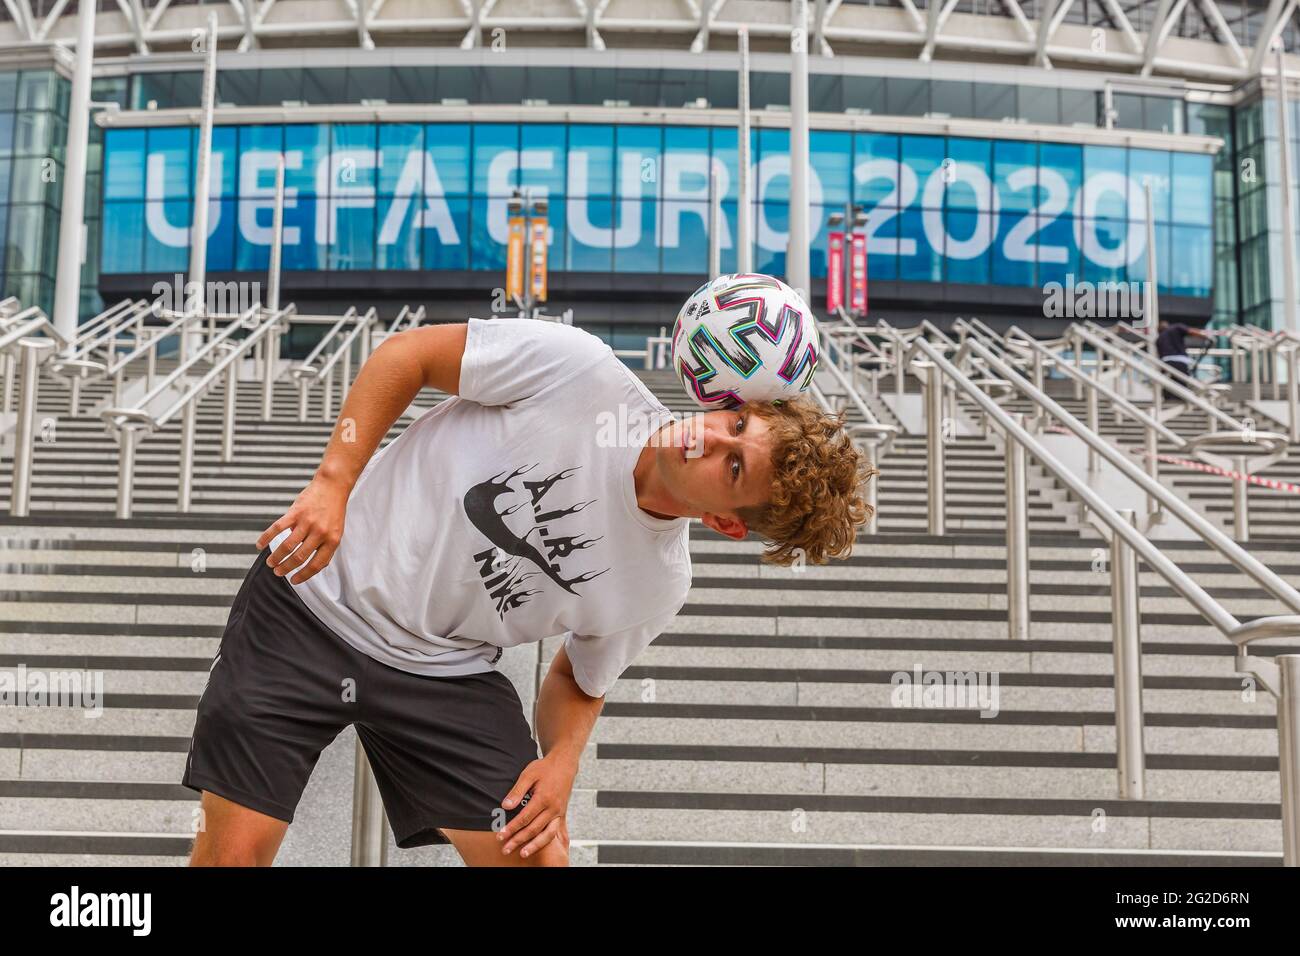 Wembley Stadium, Wembley Park, UK. 10th June 2021.   Euro 2020 ambassador, Scott Penders, showing his football skills outside Wembley Stadium, ahead of the start of the UEFA European Football Championship tomorrow.  Scott will be performing on the pitch at all Wembley matches.  Postponed by a year as the Coronavirus pandemic hit worldwide in 2020, the tournament starts on 11th June 2021, with Wembley Stadium hosting it's first match, England v Croatia, on 13th June 2021.   Amanda Rose/Alamy Live News Stock Photo